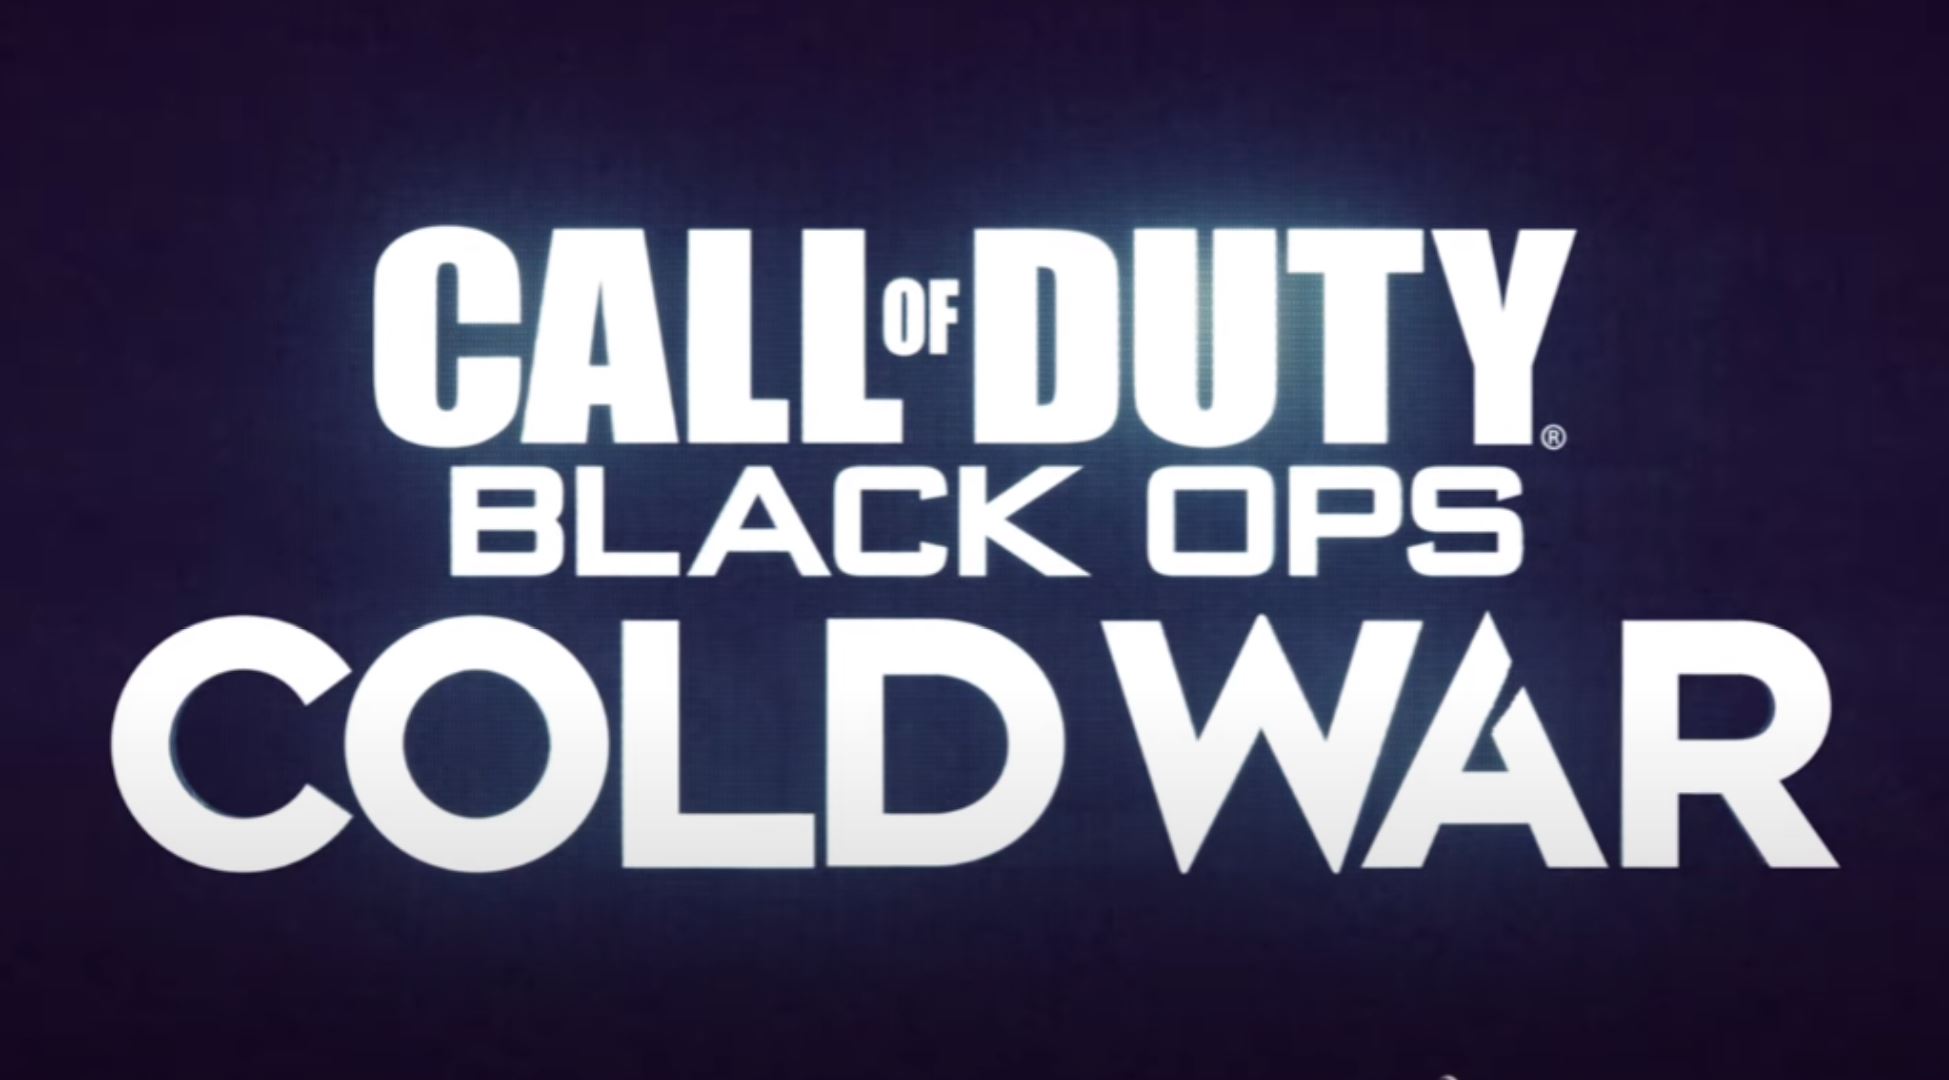 Call of Duty Black Ops: Cold War To Be Revealed Next Week